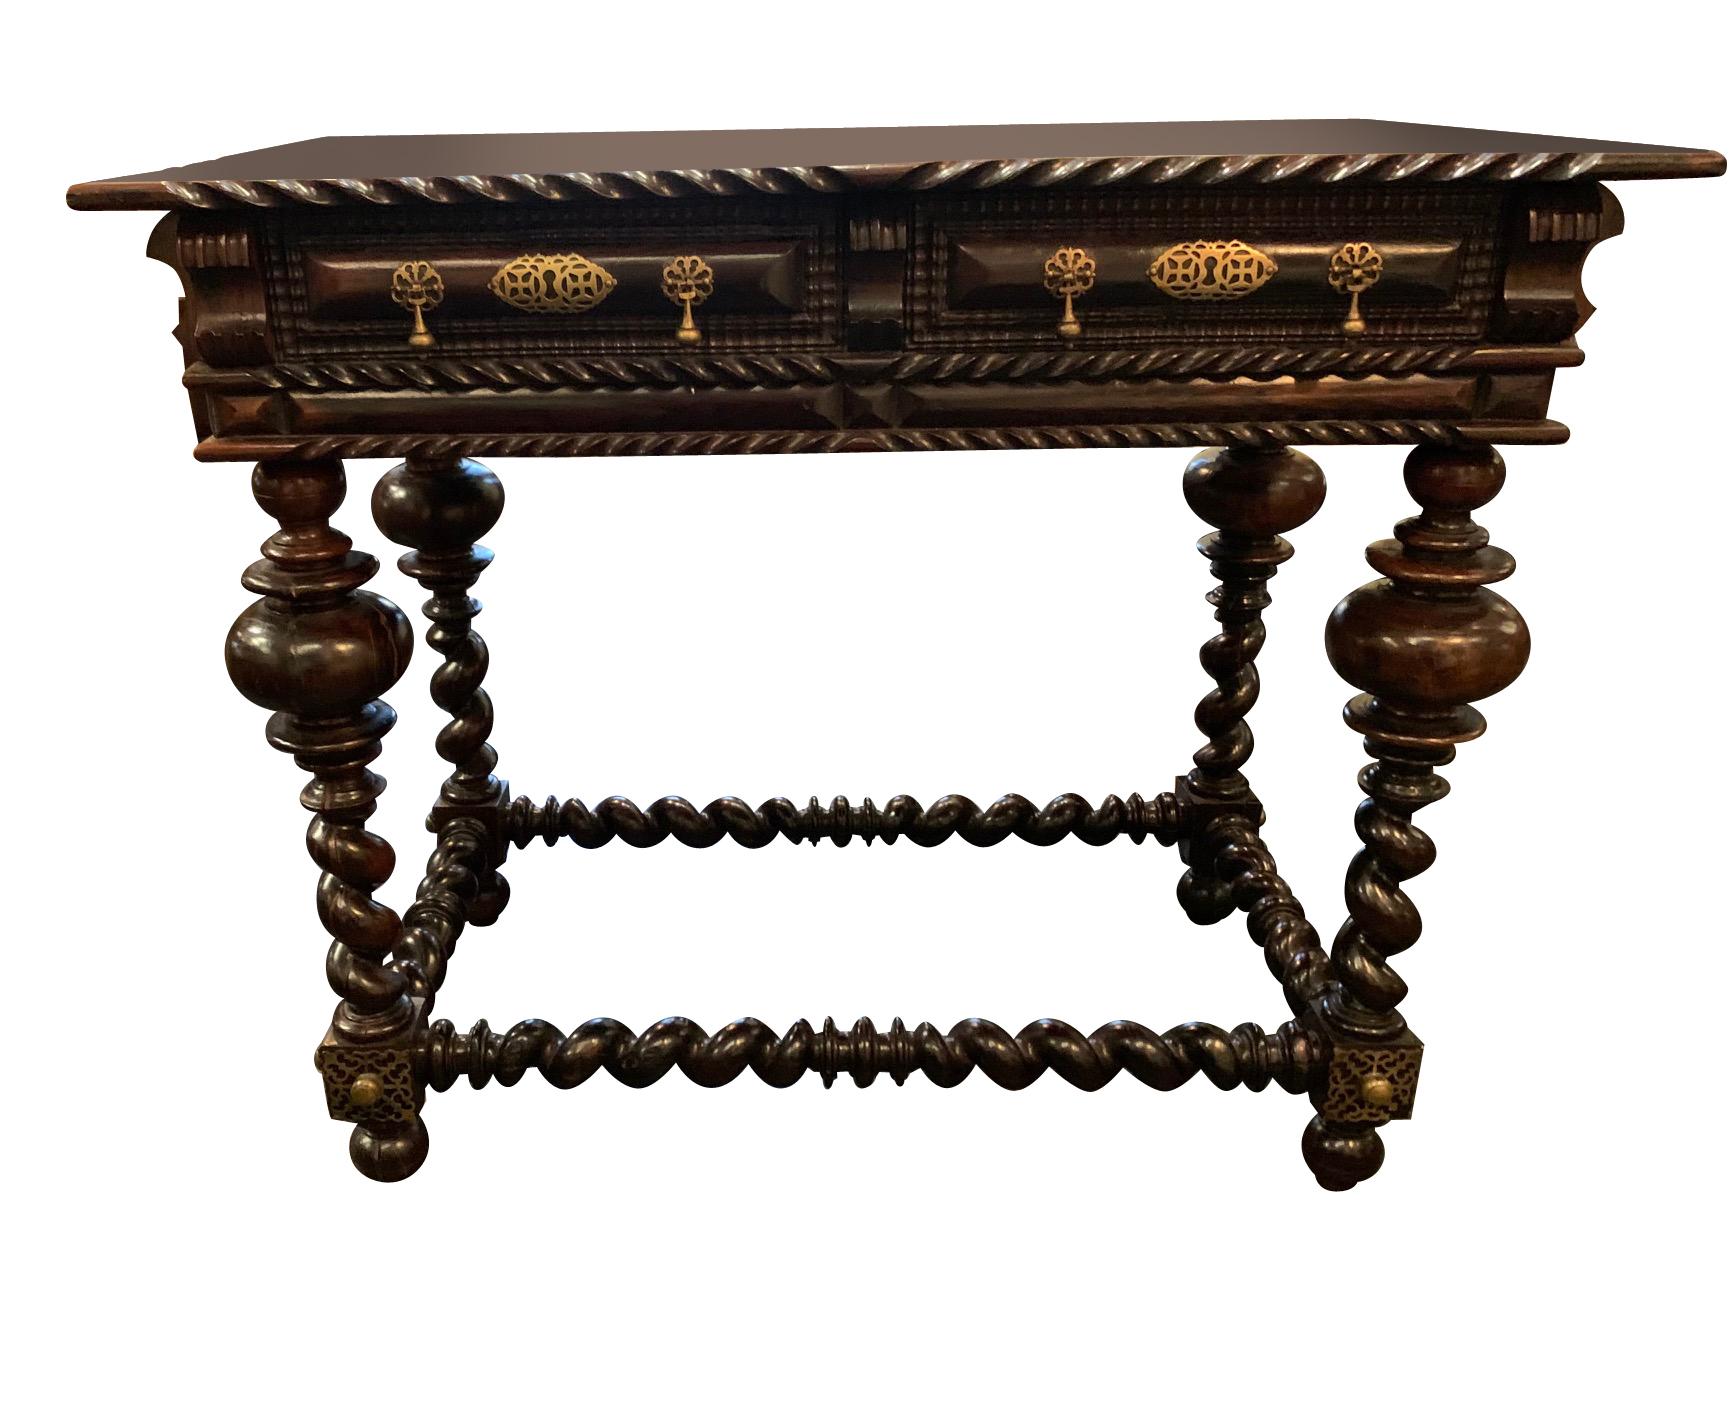 18th Century portuguese side table with two drawers.
Classic decorative trim with ornate brass details.
Barley twist legs and stretcher.
Walnut.
Larger version also available F2956.